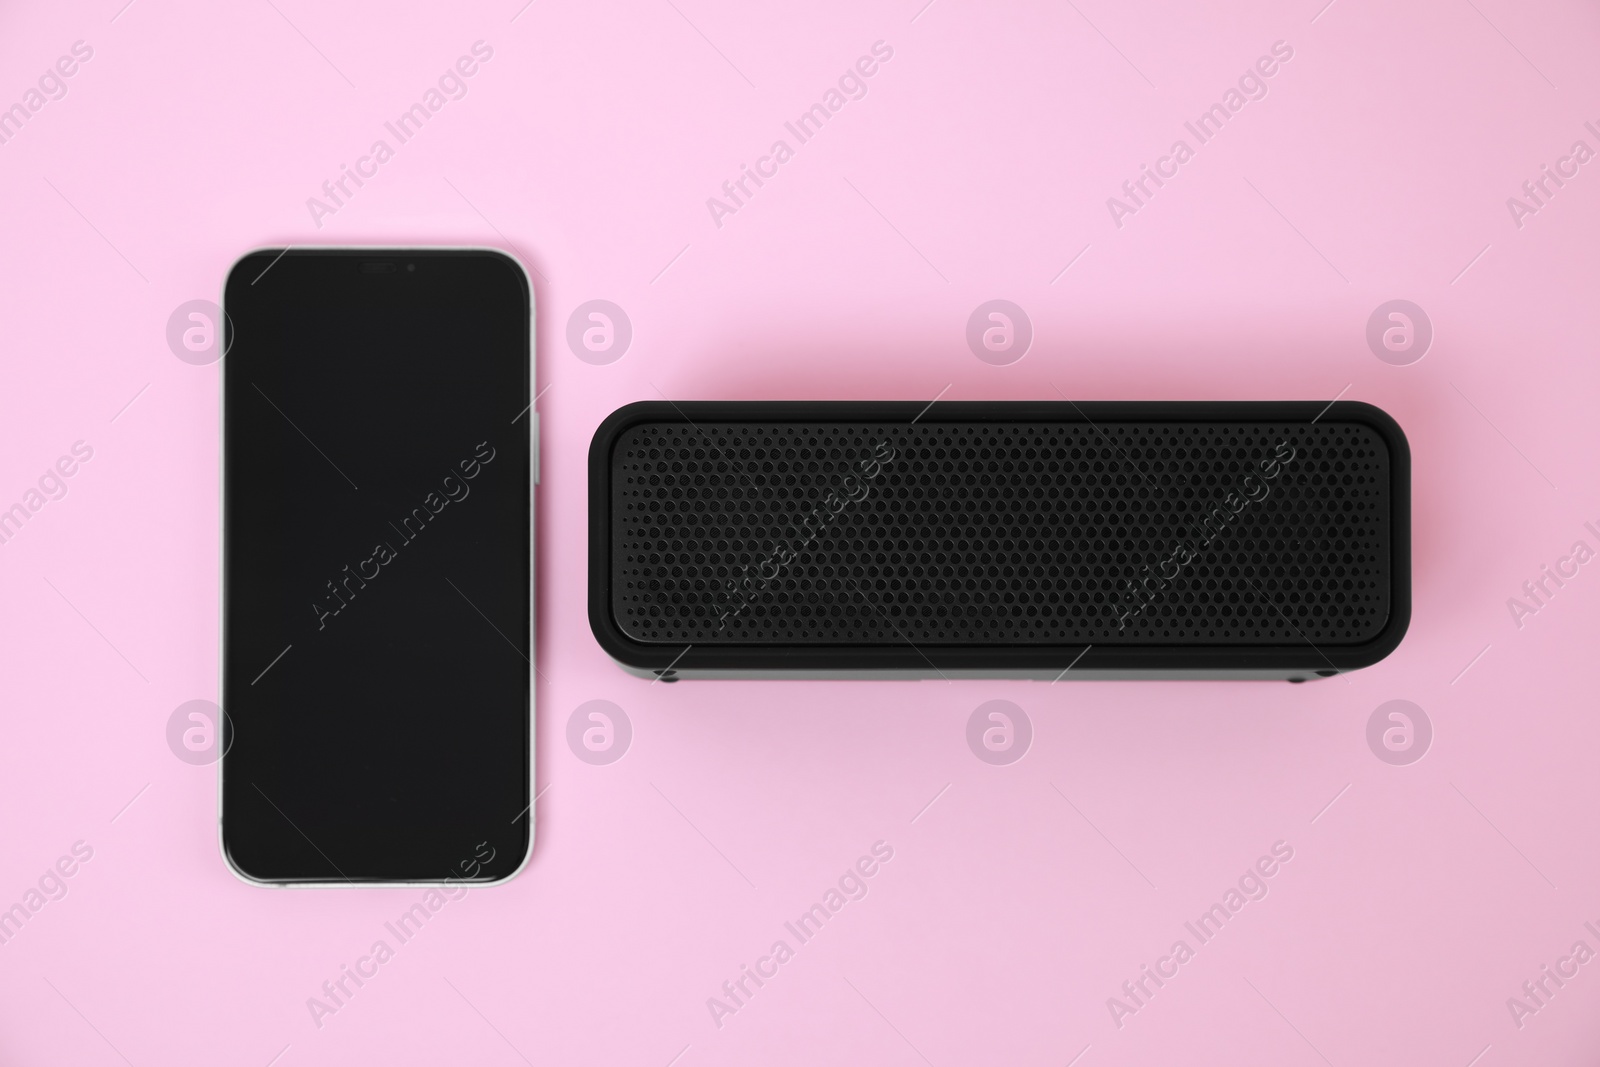 Photo of Portable bluetooth speaker and smartphone on pink background, flat lay. Audio equipment